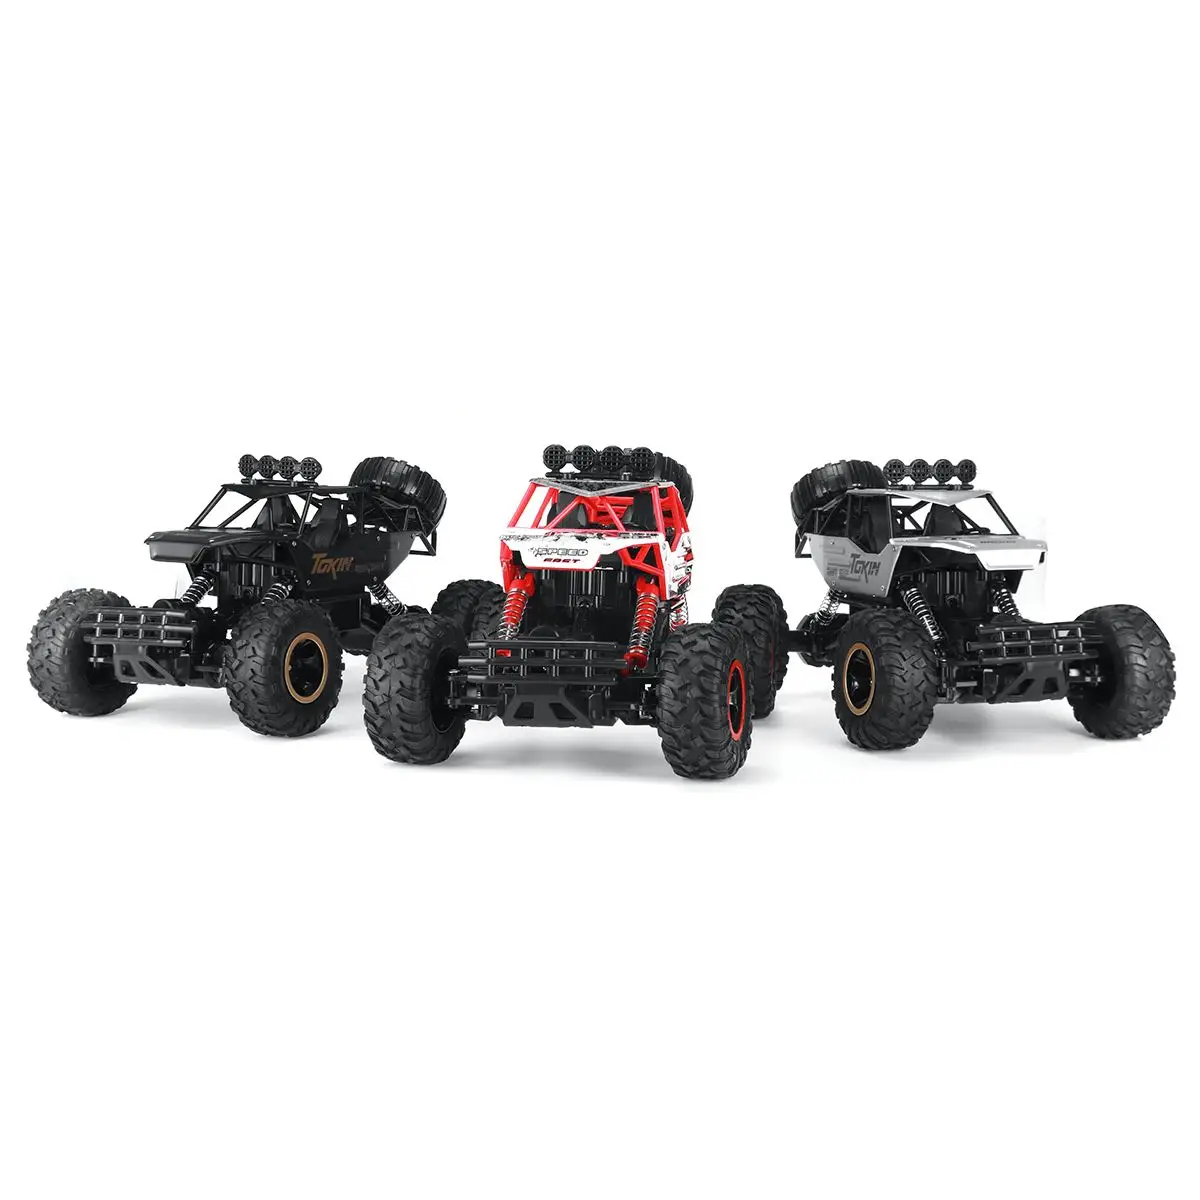 

1/12 Alloy Metal RC Car with Two Rechargeable Batteries 4WD 2.4G Off Road Big Foot Crawler RC Vehicle Models Kids Toys Machine